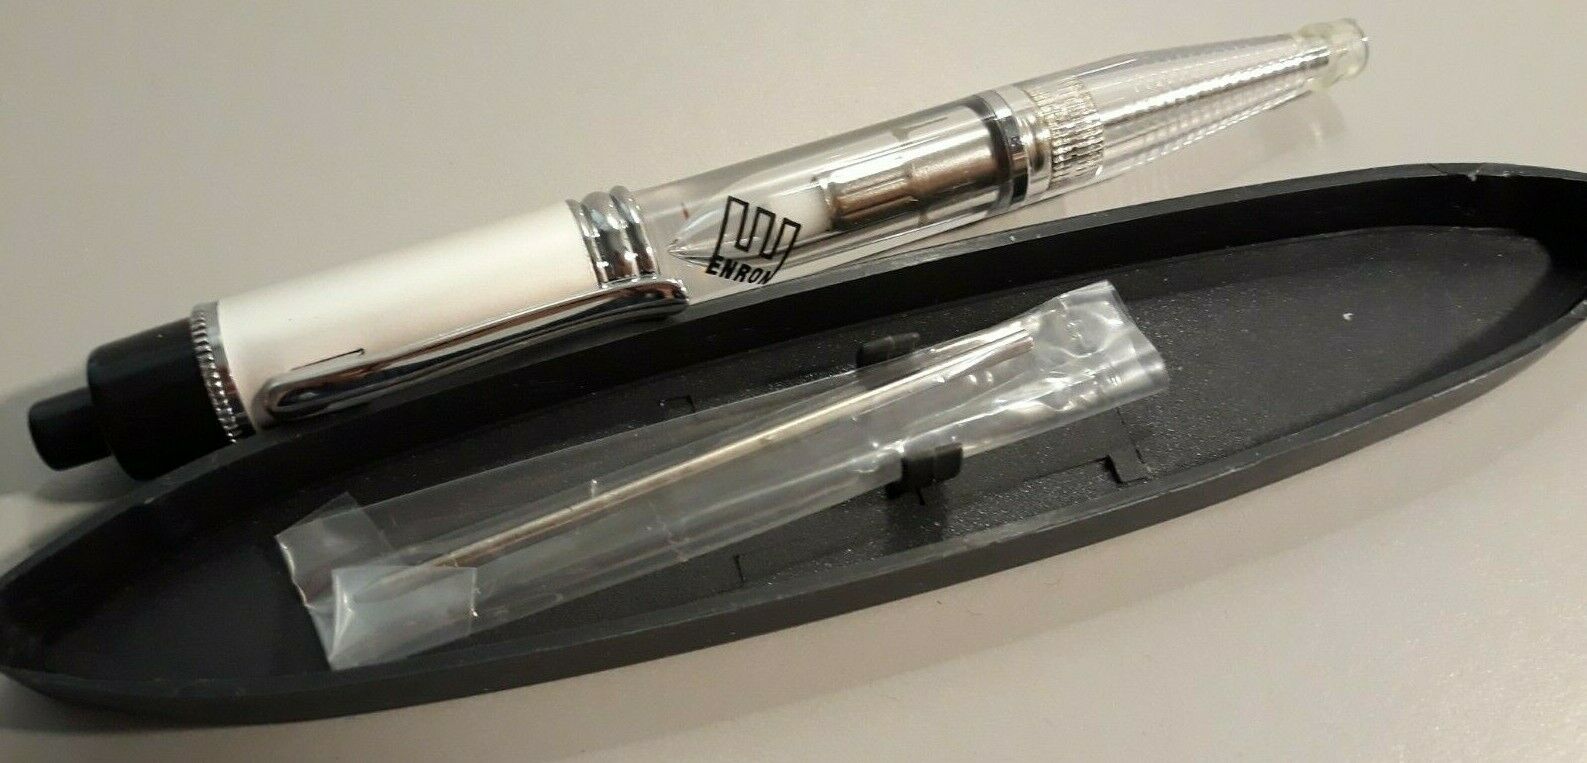 Vintage Enron Light Pen In Case Box Collectible Made In Taiwan Never Used